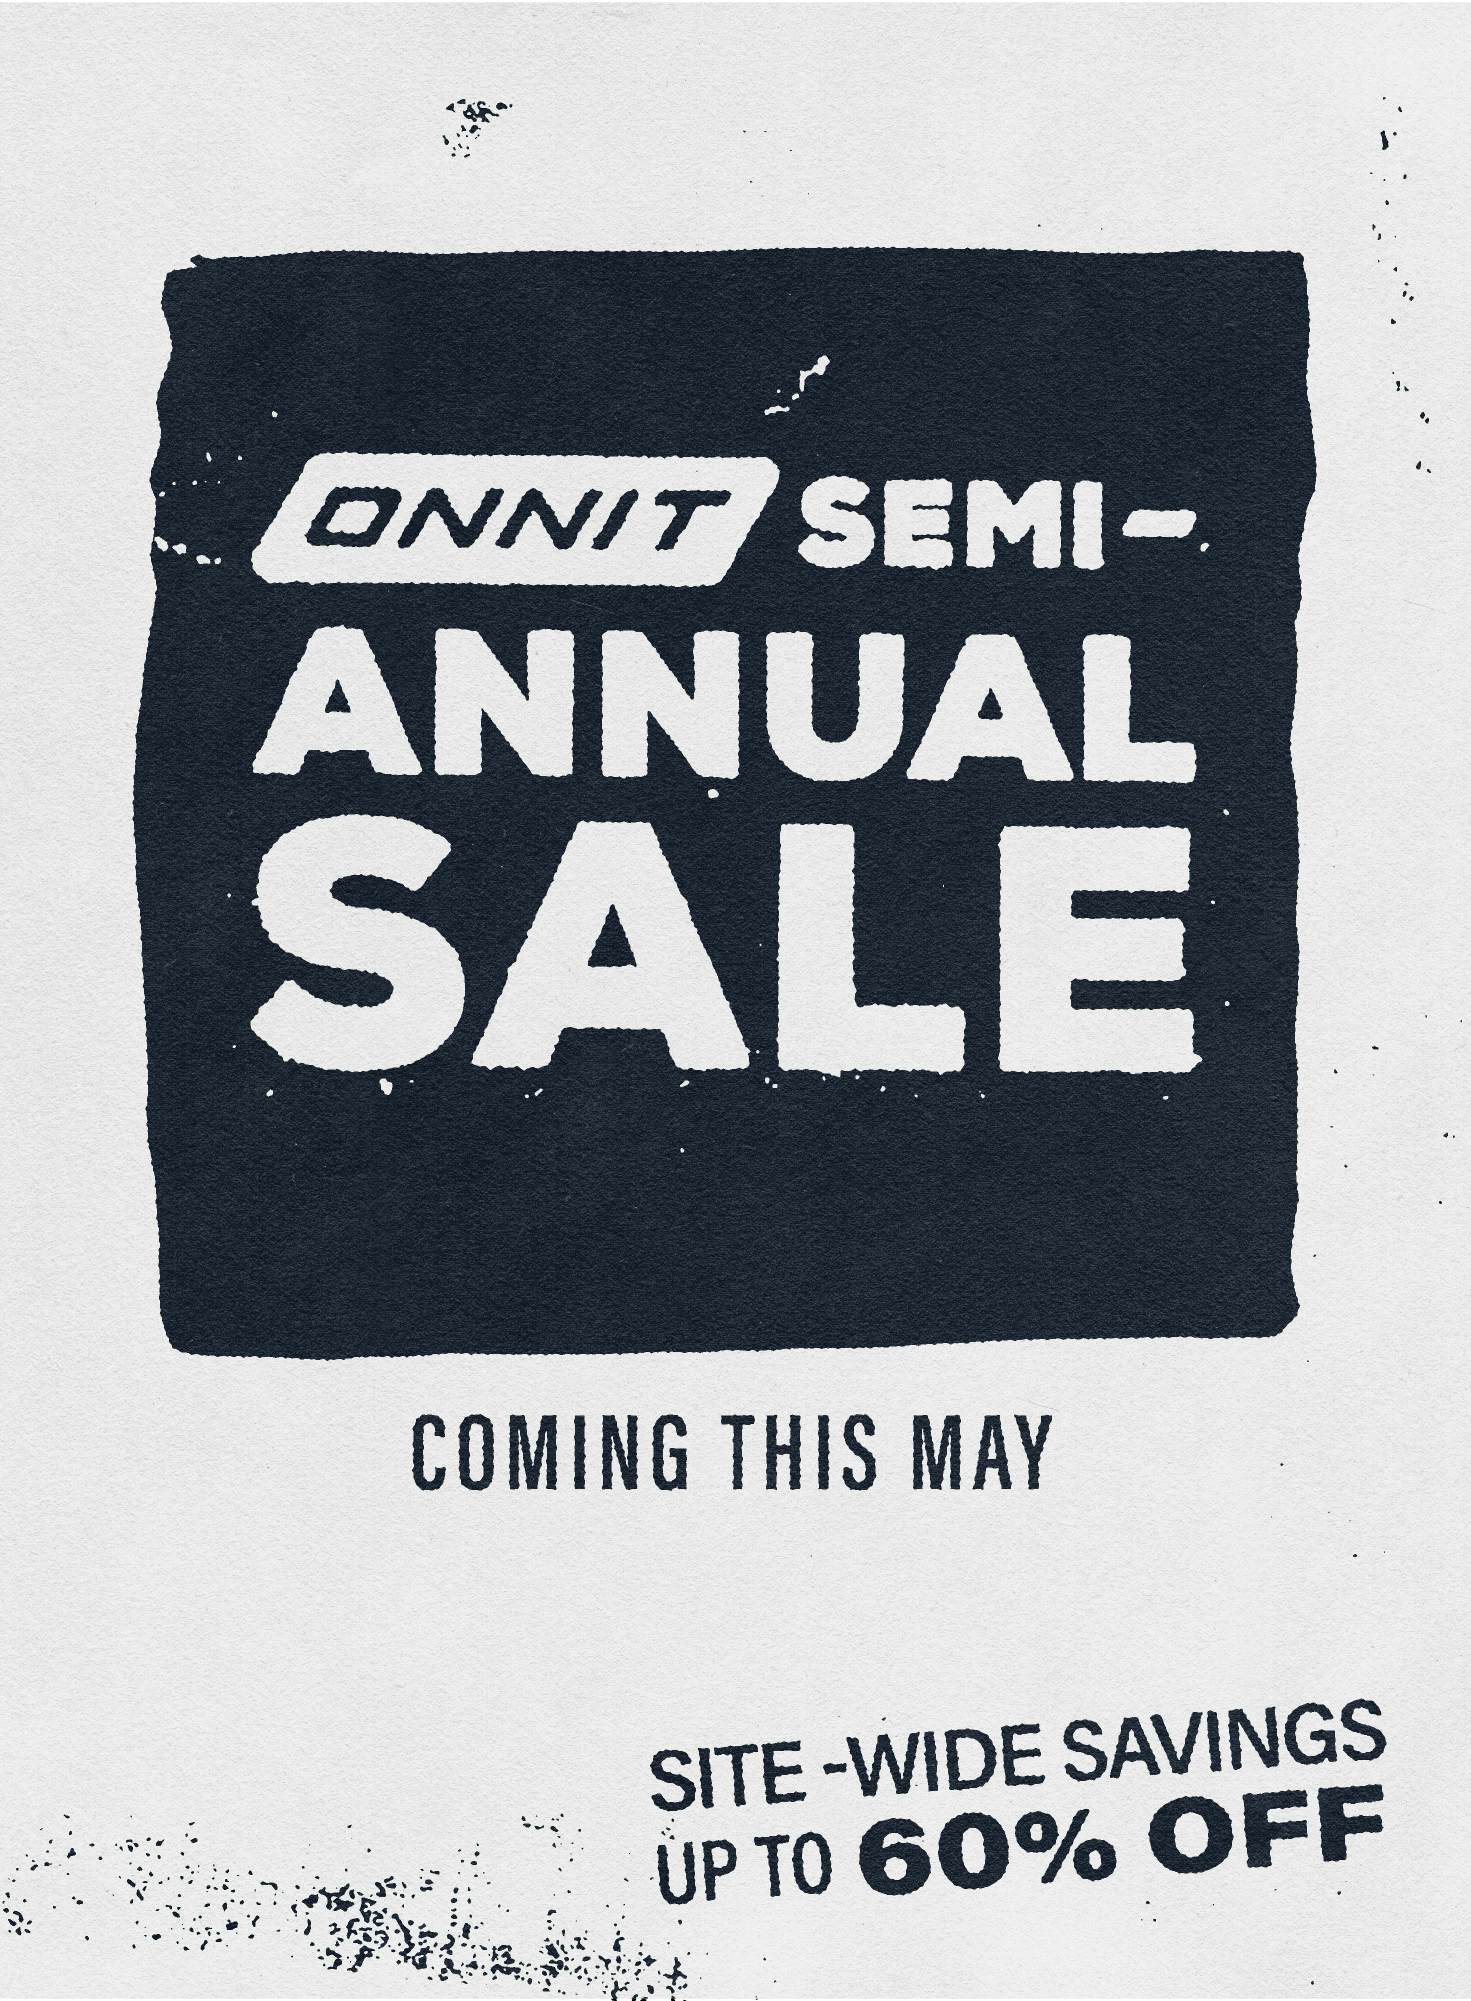 The Semi-Annual Sale Is Coming Soon